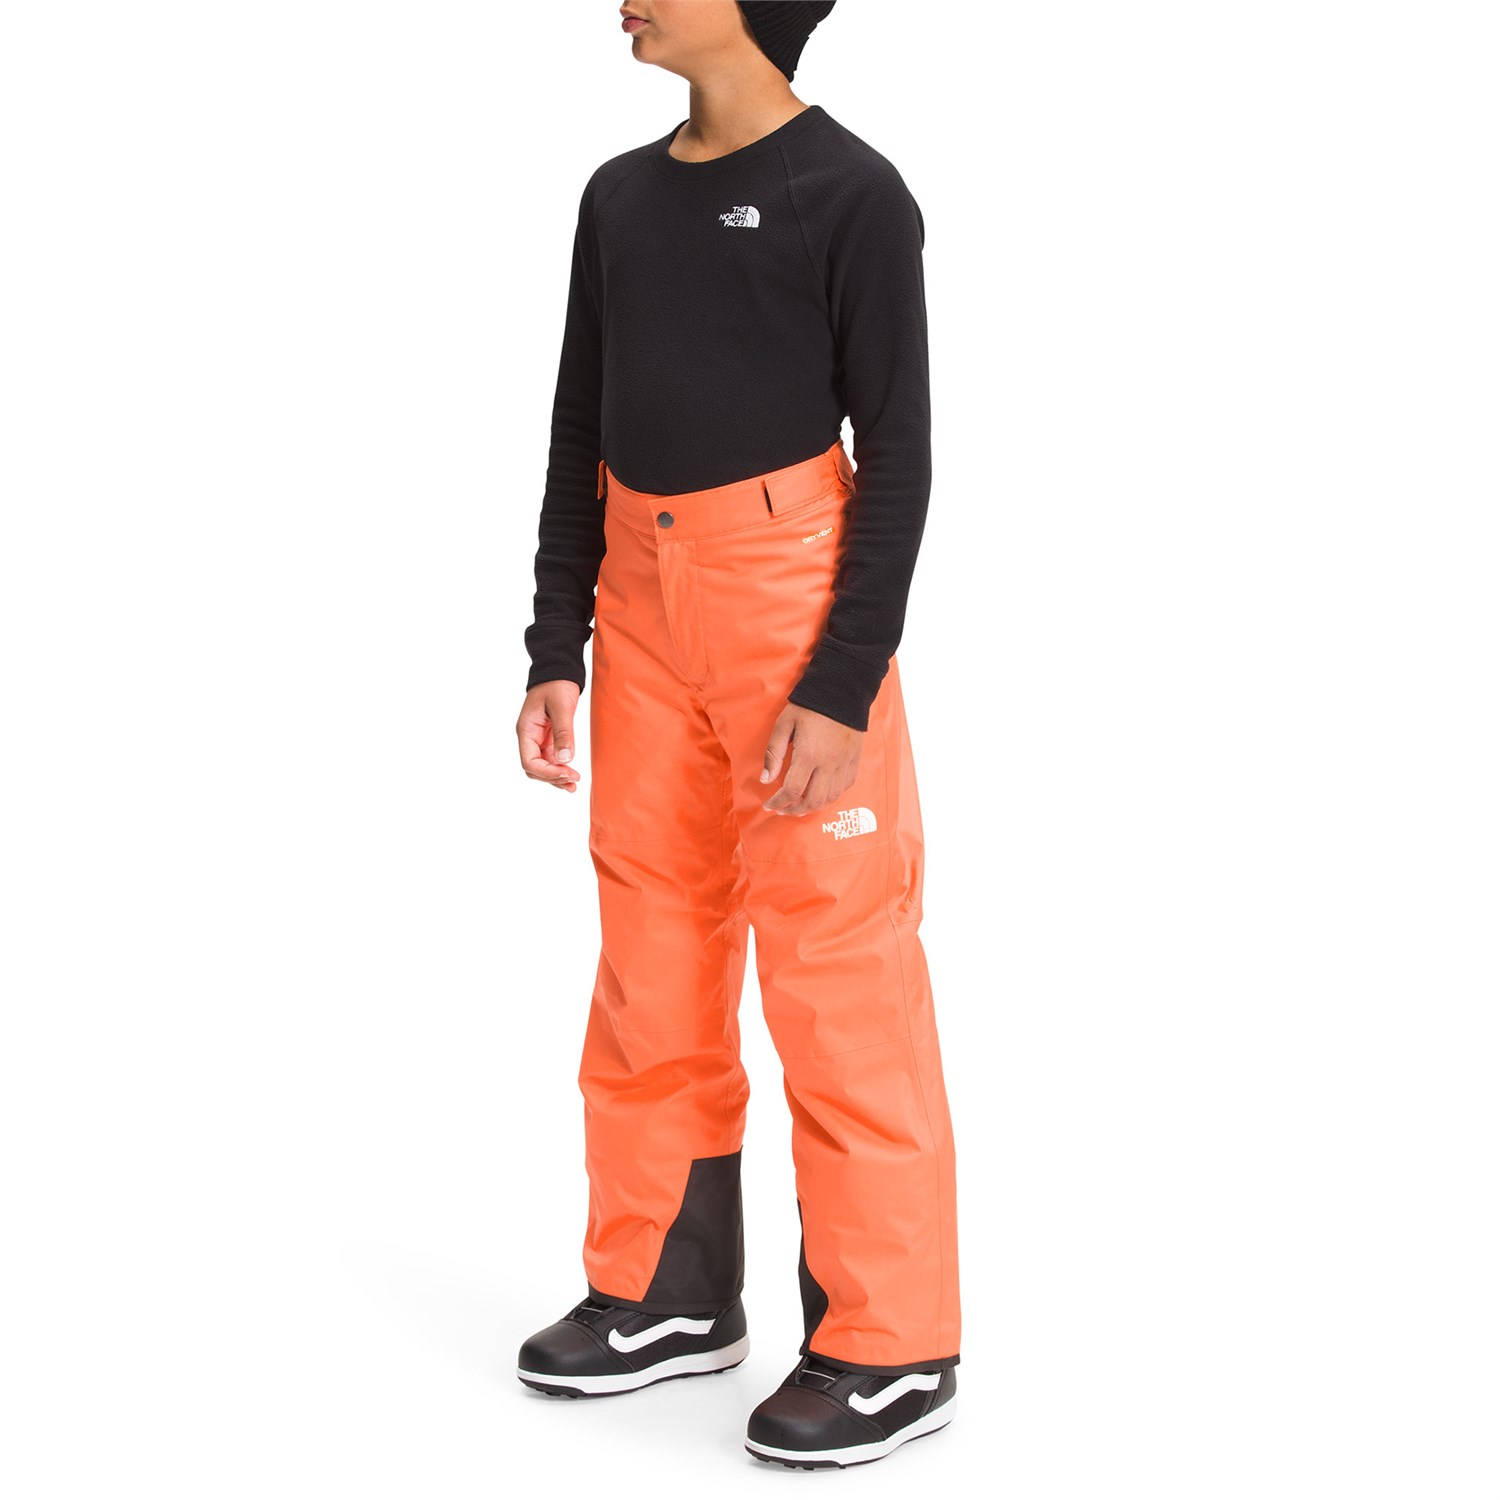 THE NORTH FACE Boys' Freedom Insulated Pant, Power Orange, S